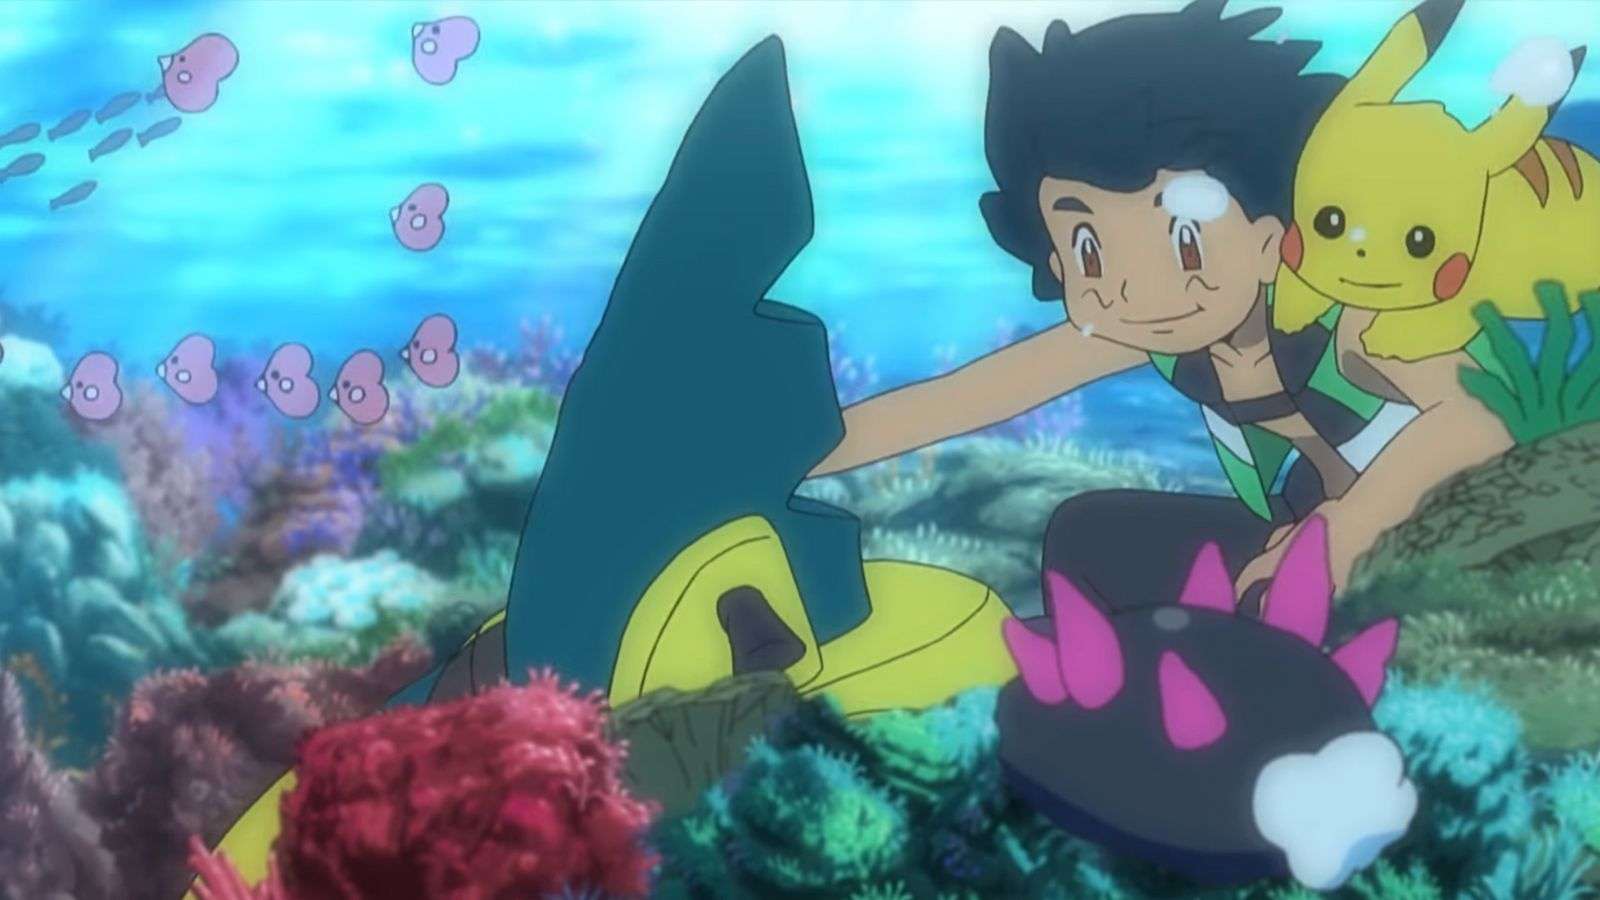 Ash and Pikachu underwater in the Pokemon anime.